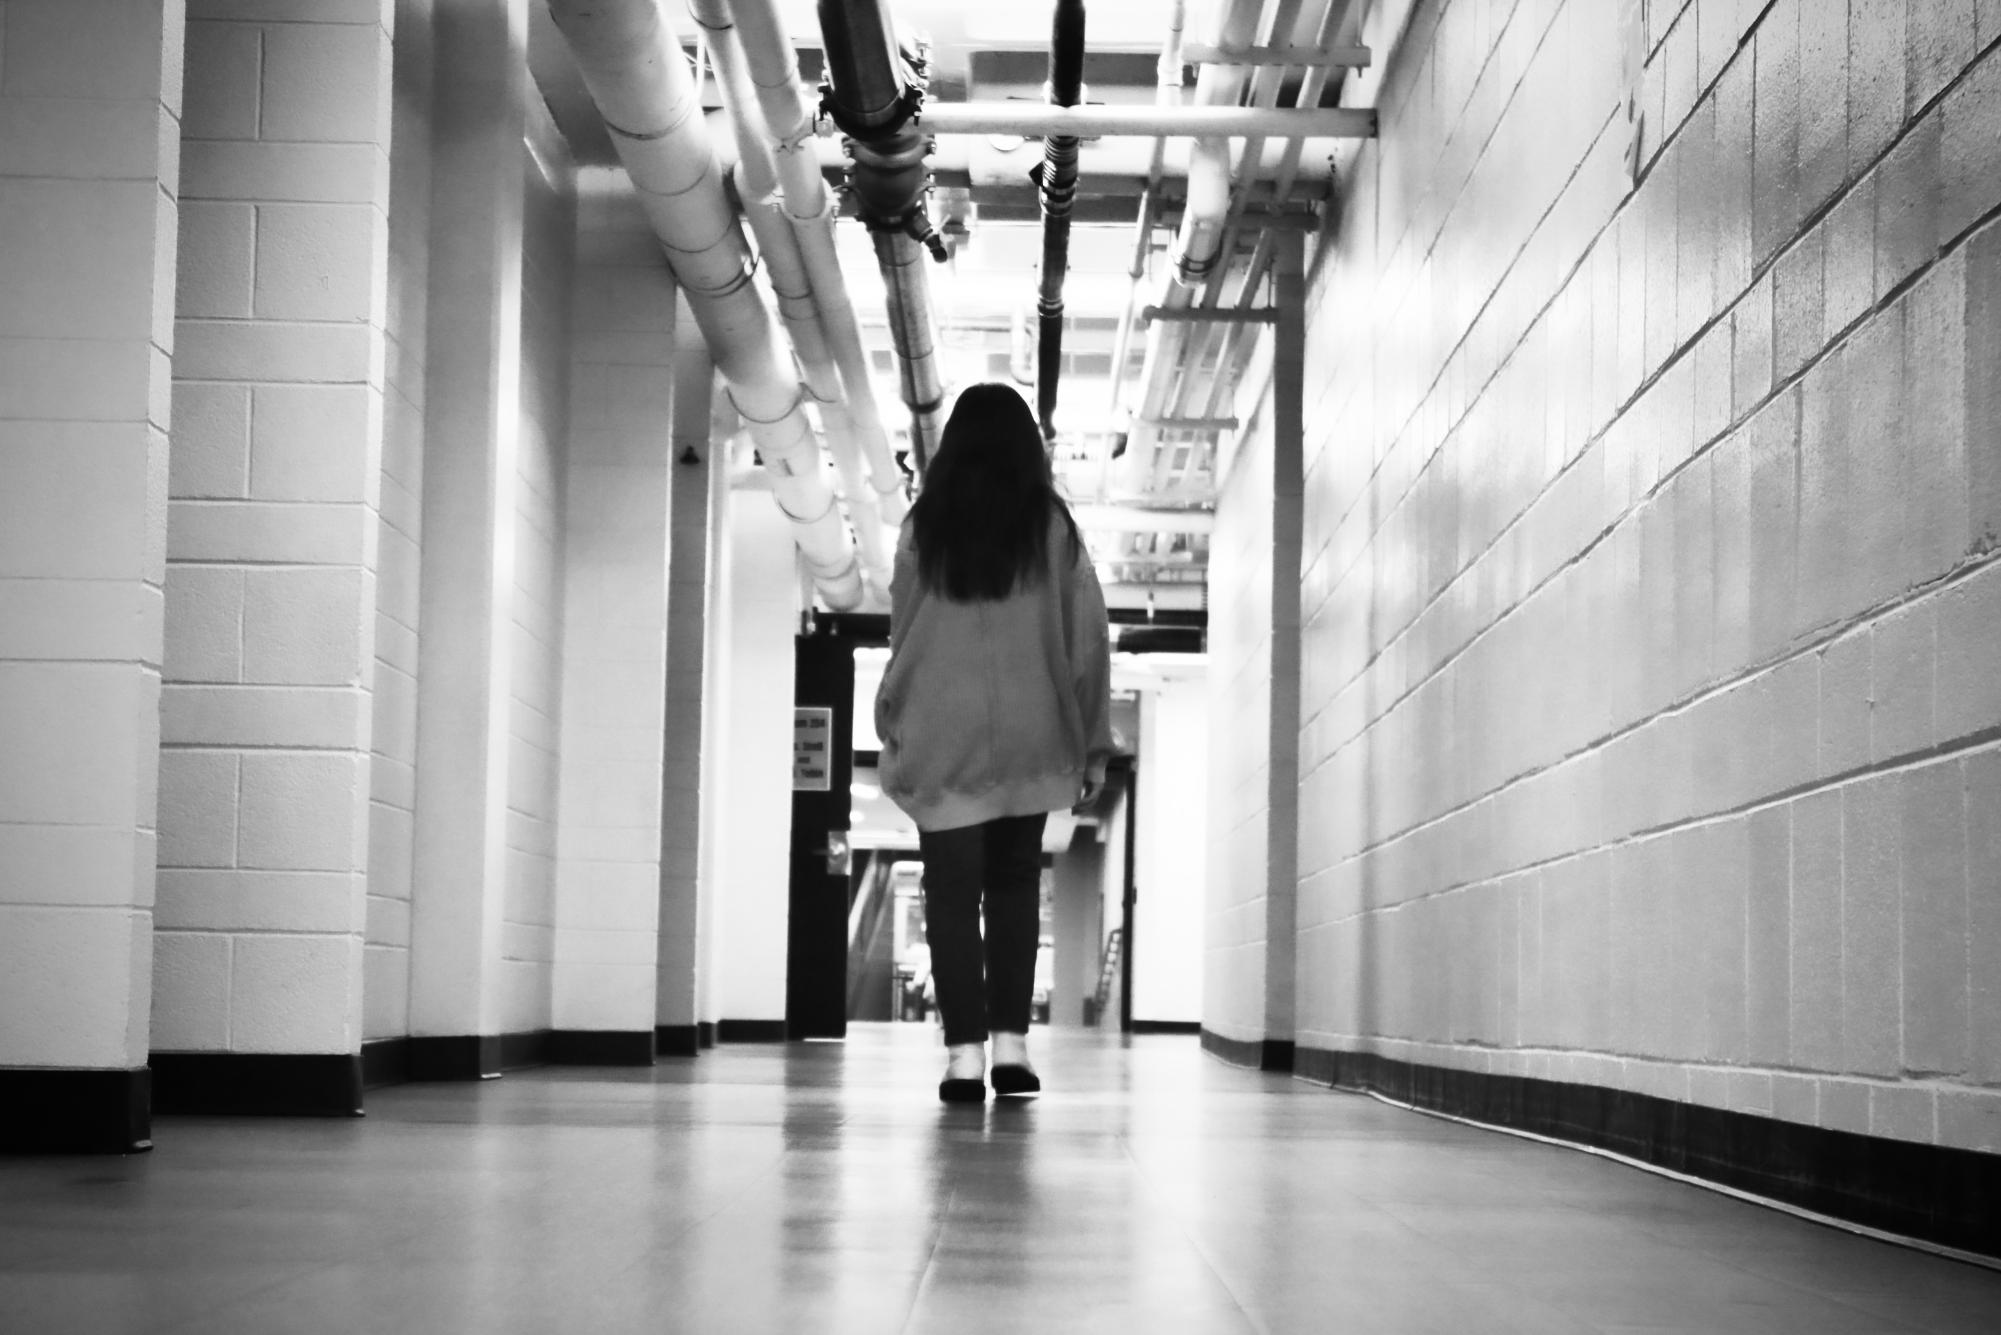 A student may walk through the halls of MCHS never knowing that the person walking past them is a victim of sexual assault — but those victims need to know they aren’t alone.